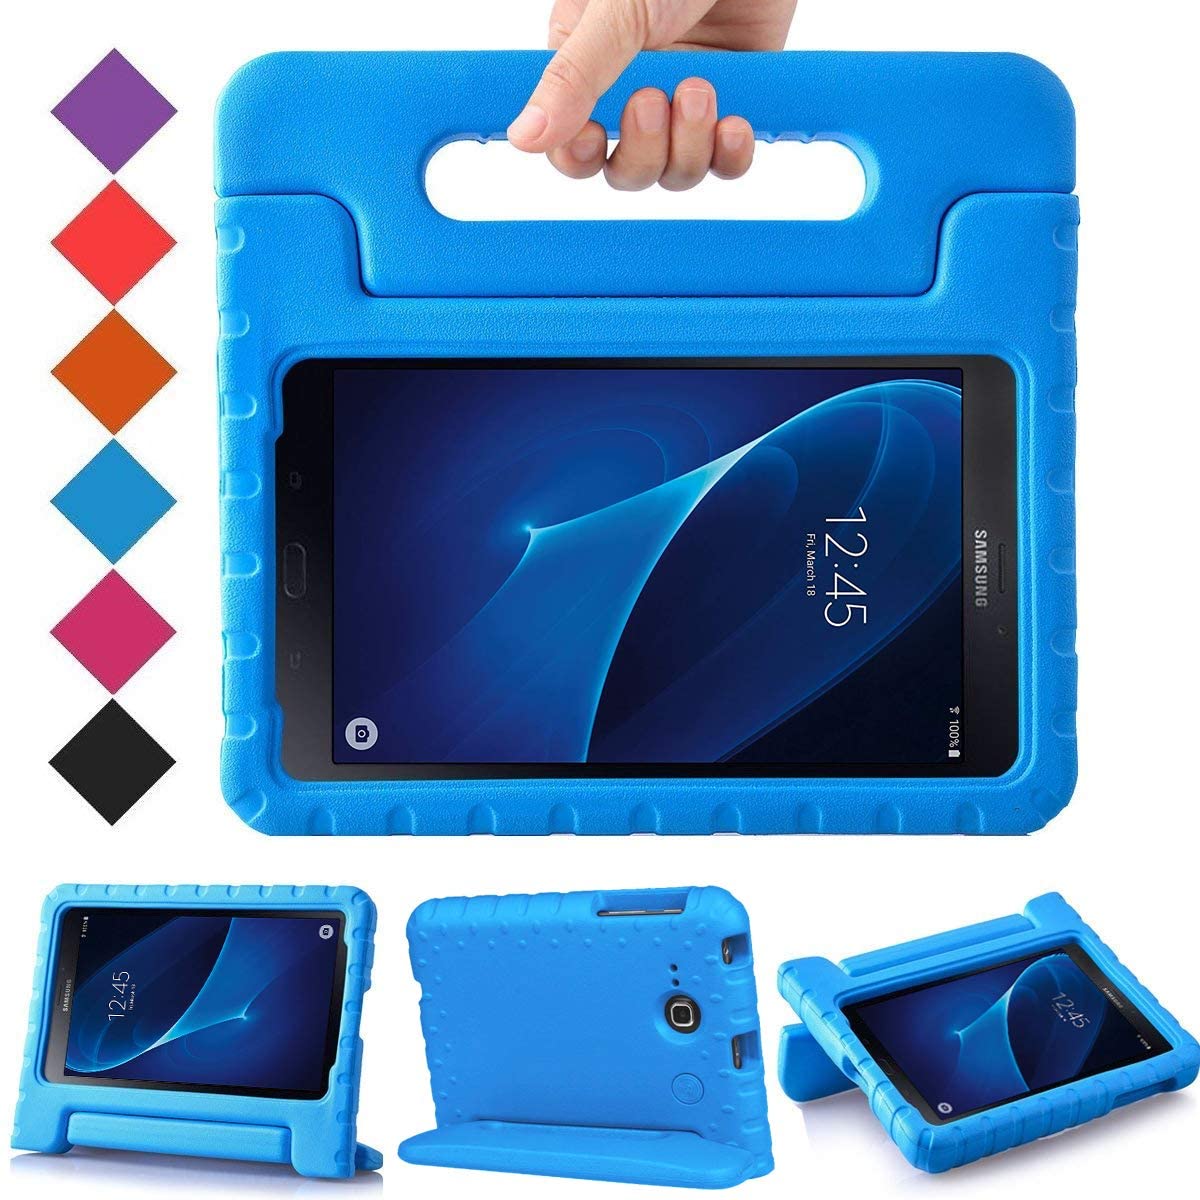 MOKO Kids Case for Samsung Galaxy Tab A 7.0 2017 Shockproof Light Weight A 7-inch Tablet - Blue - e4cents